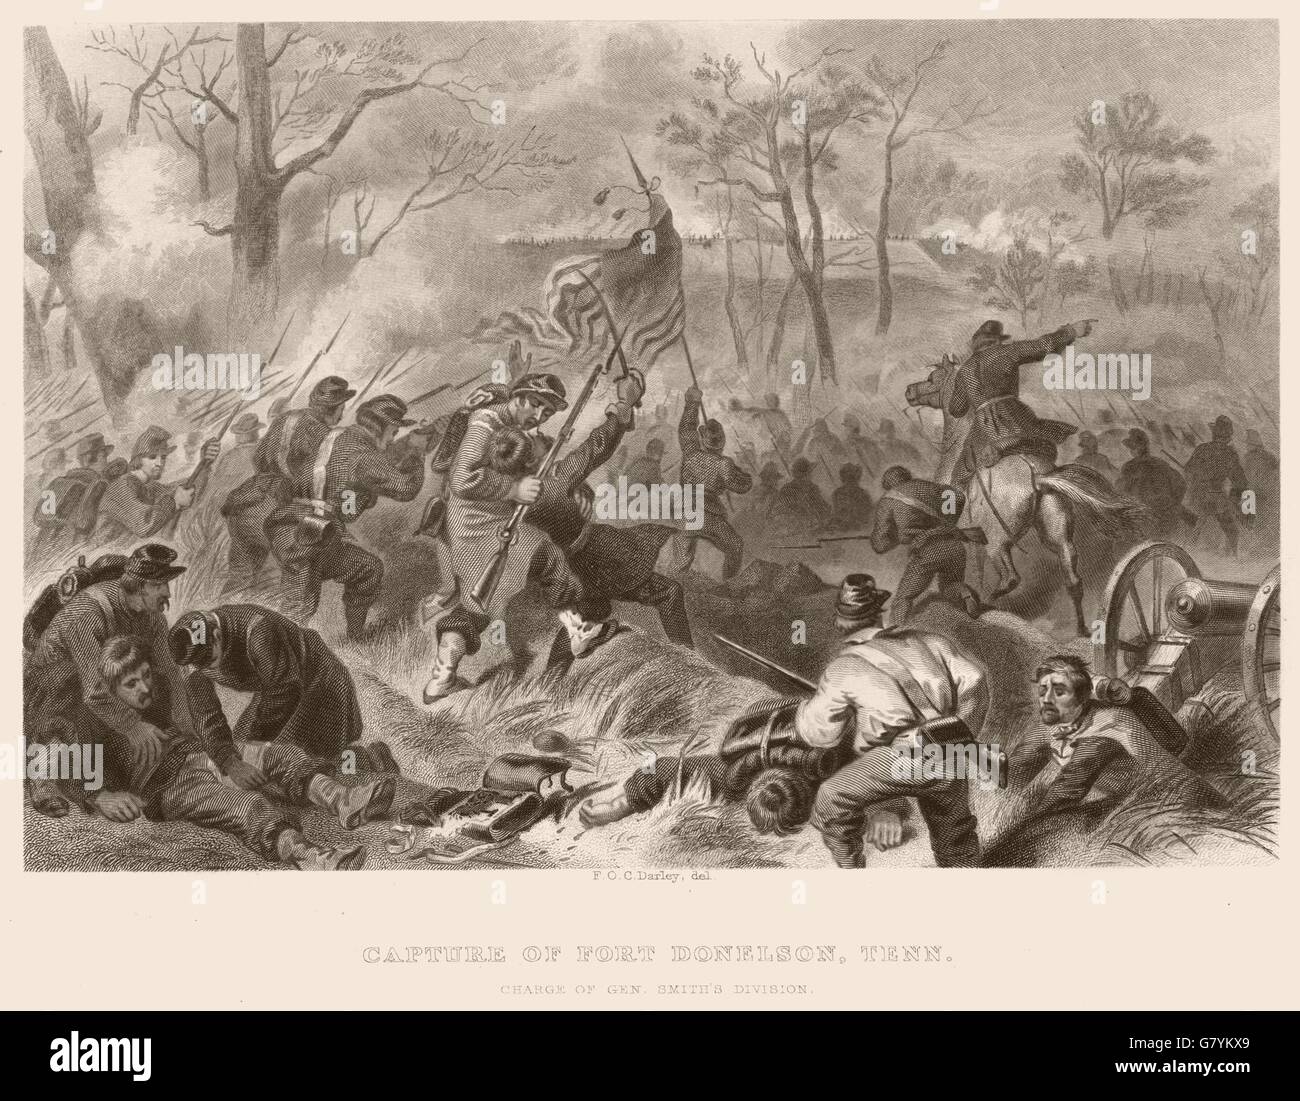 US CIVIL WAR. Capture of Fort Donelson, Tennessee. Gen Smith's Div charge, 1864 Stock Photo